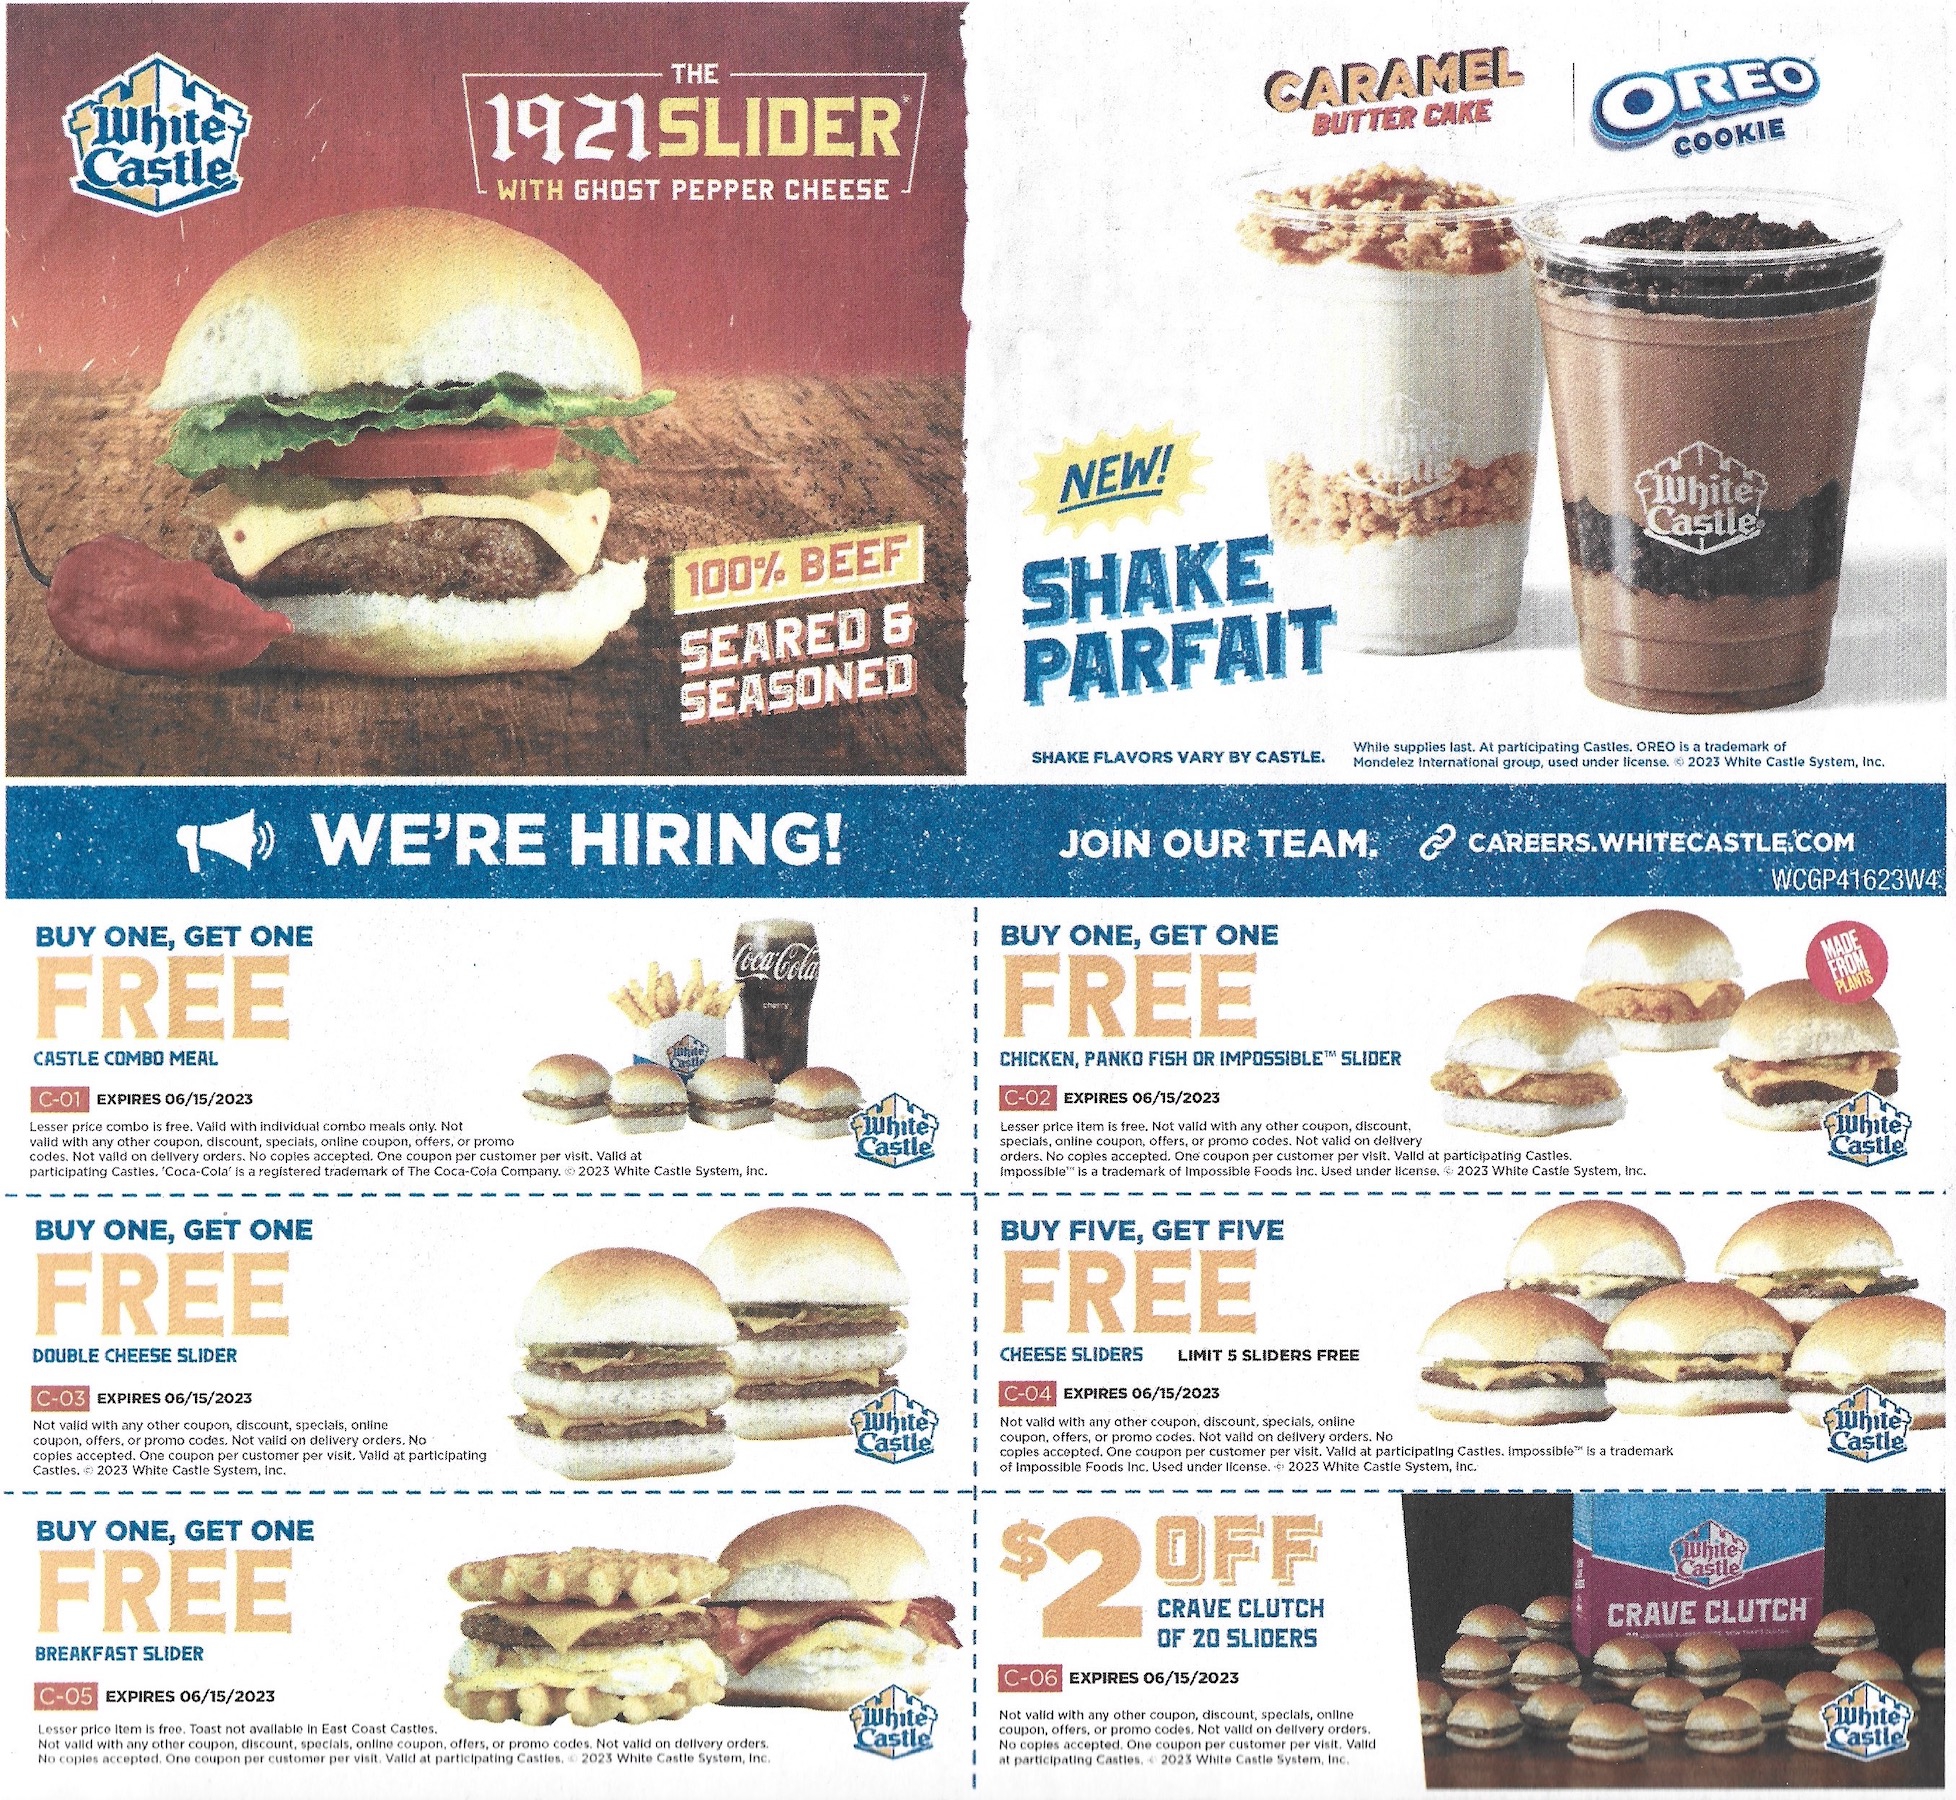 White Castle Printable Coupons - Buy One Get One Free - Expires 06/15/2023